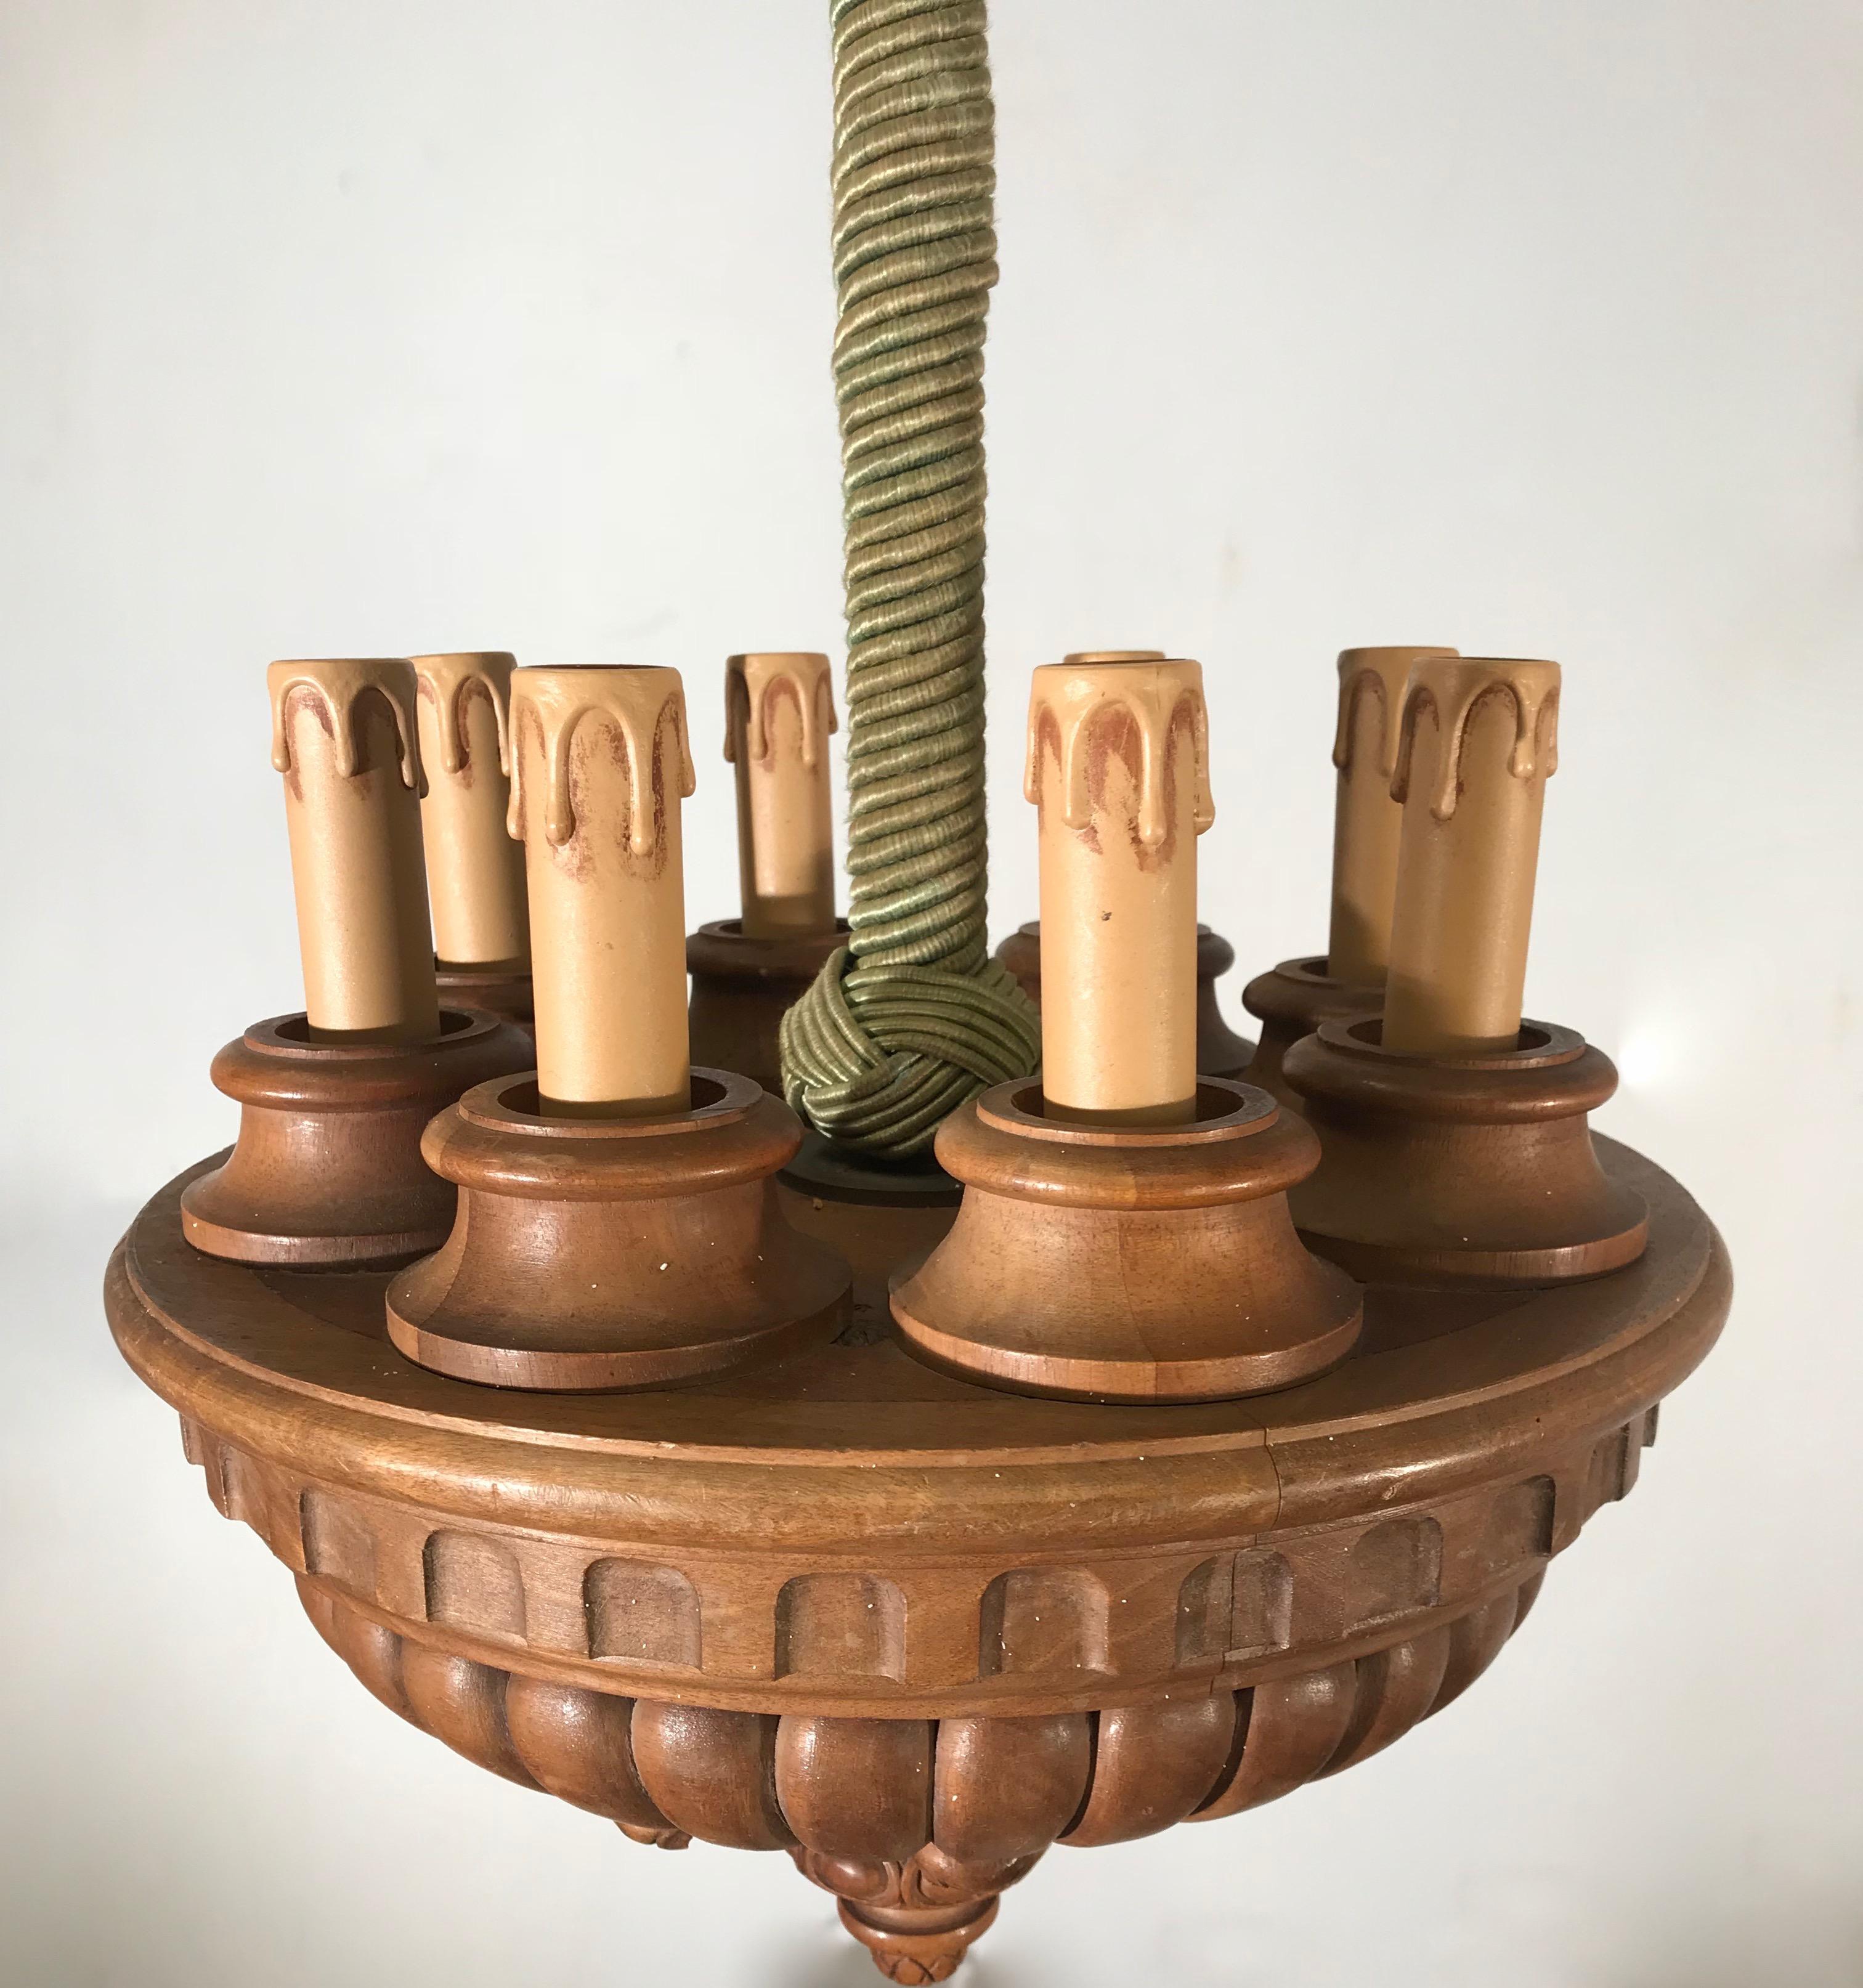 Rare and Decorative Early 1900s Eight-Light Quality Carved Nutwood Pendant Light For Sale 1